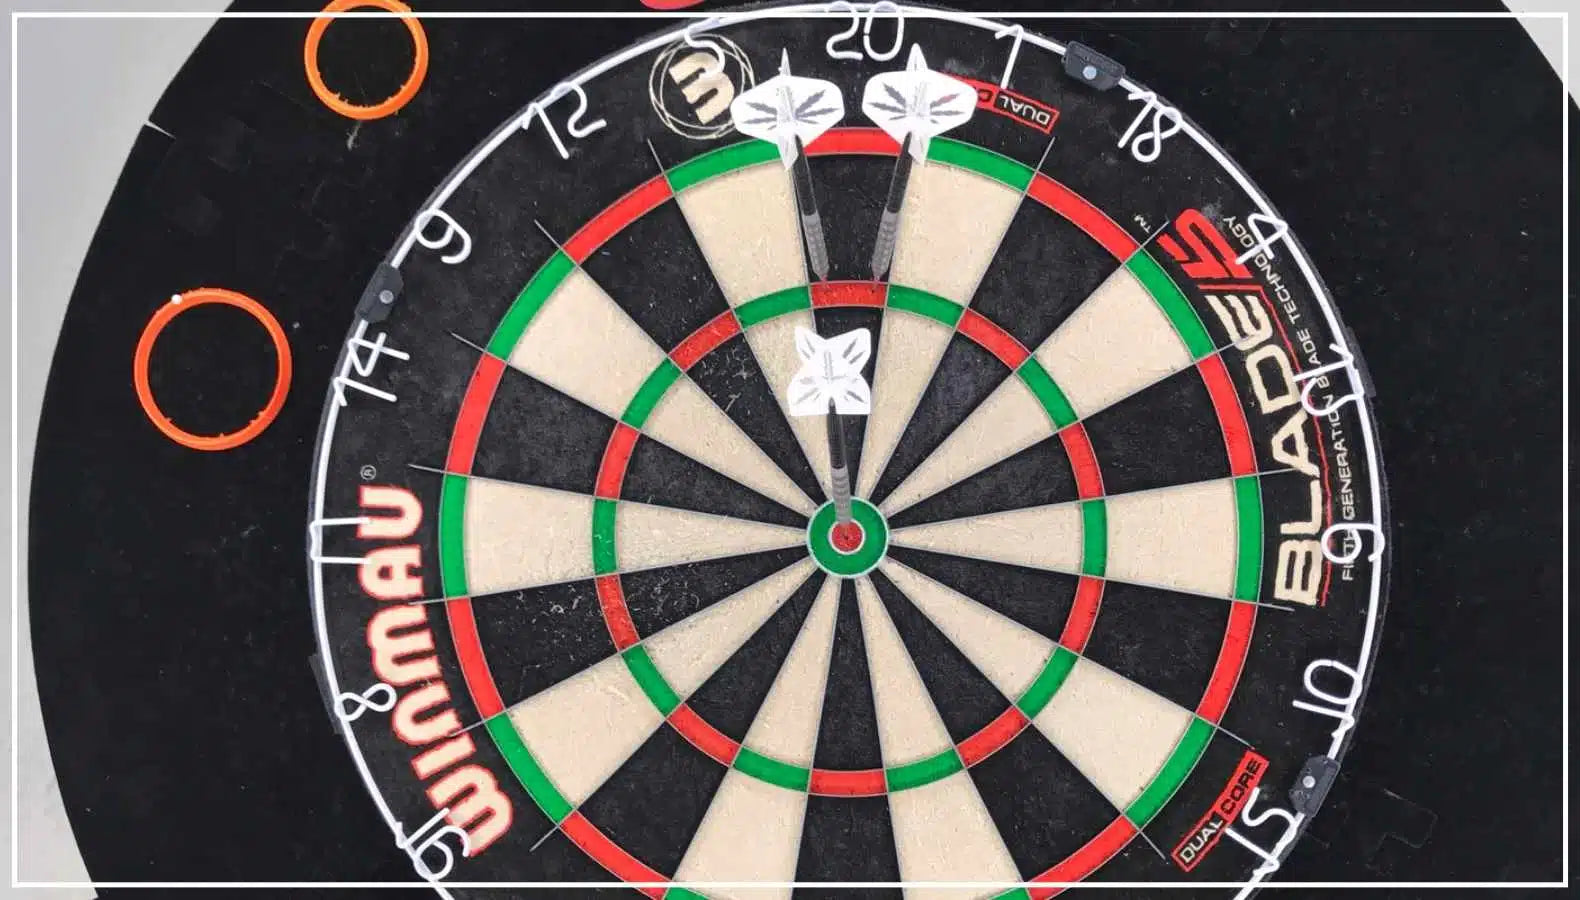 501 Darts explained: Fun and excitement guaranteed 🎯